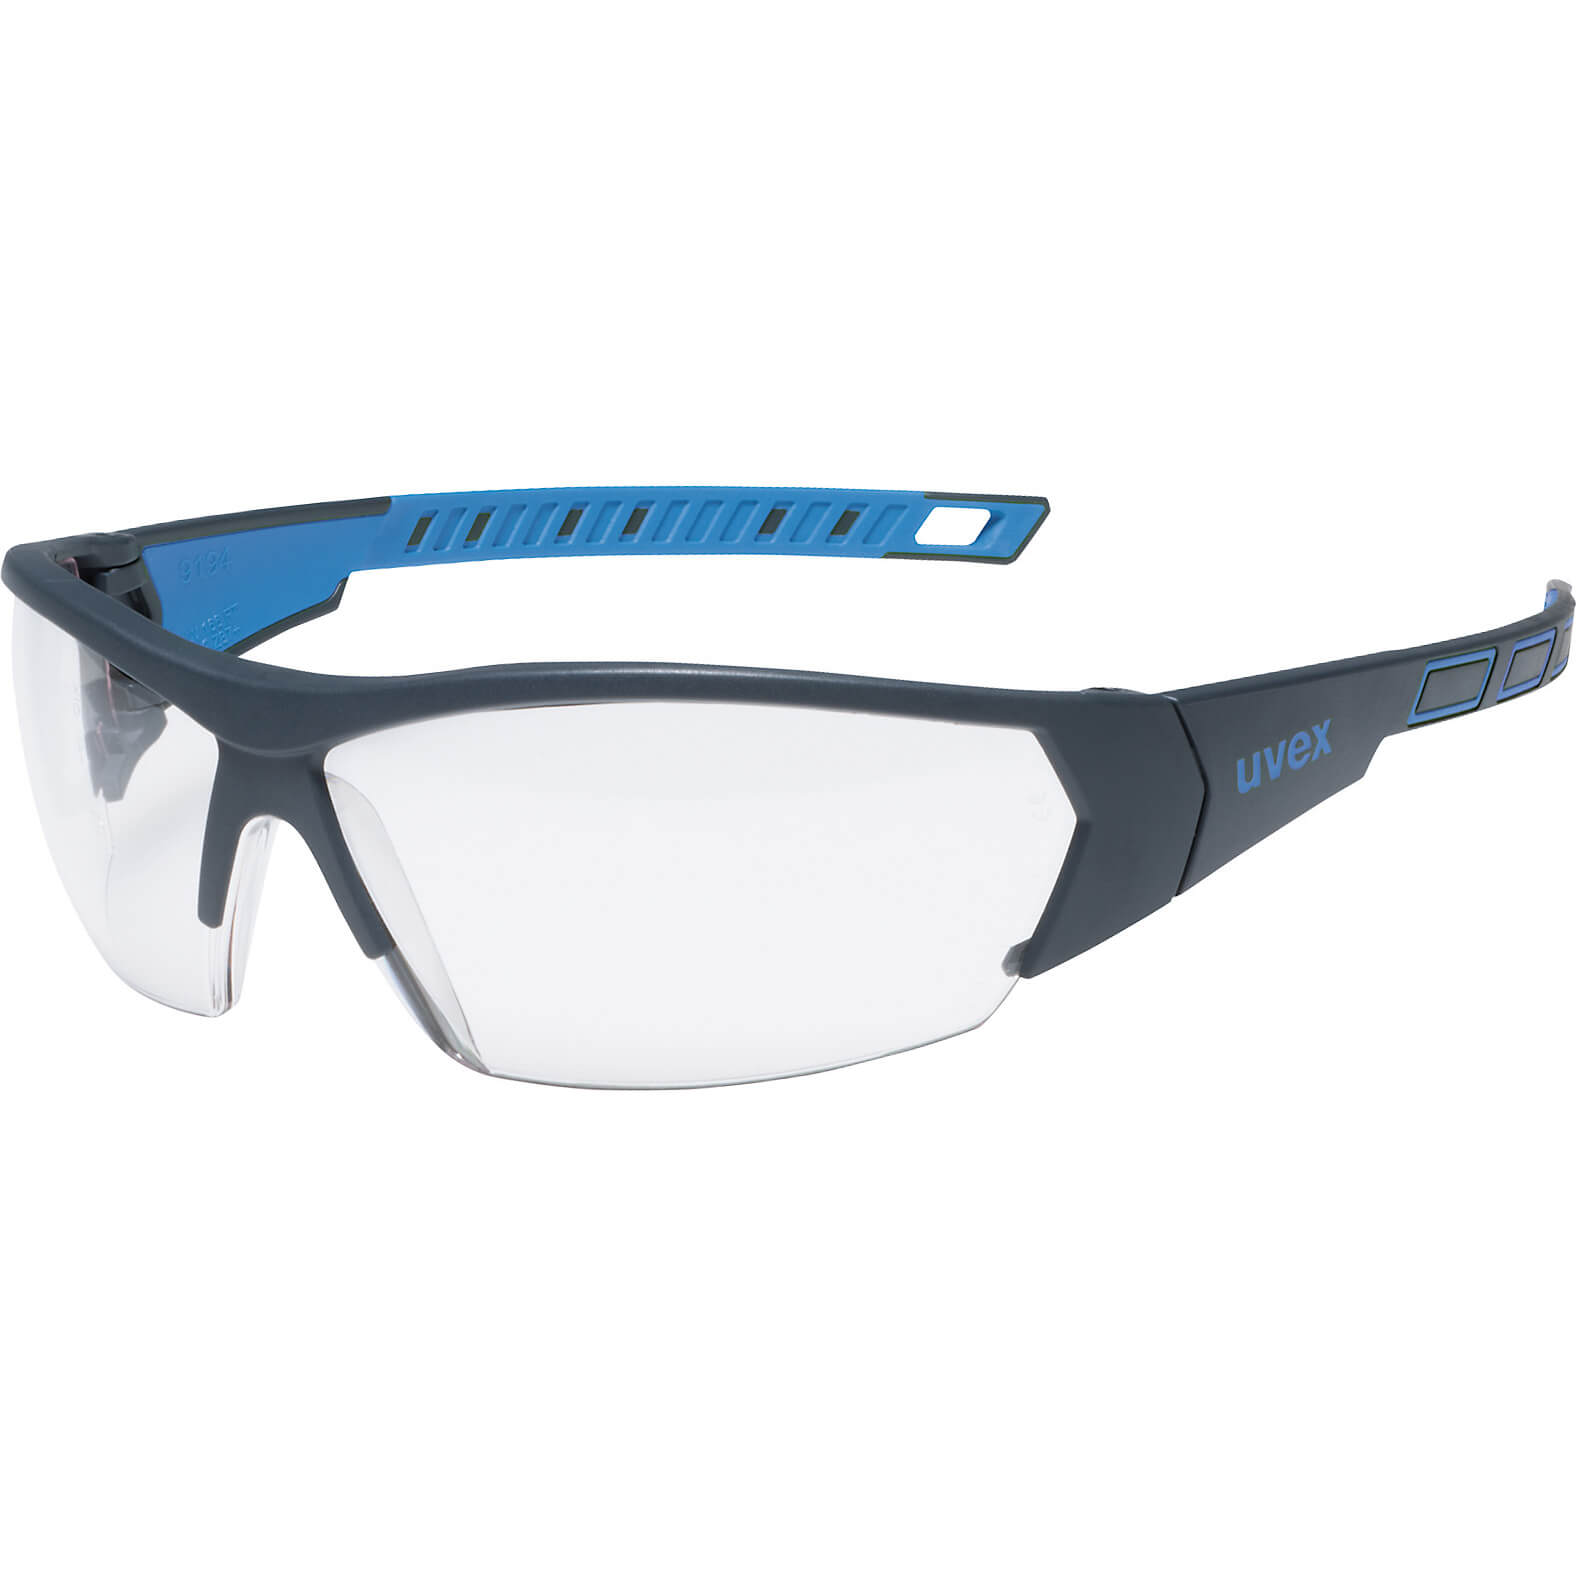 Uvex I-Works Safety Glasses Anthracite Clear